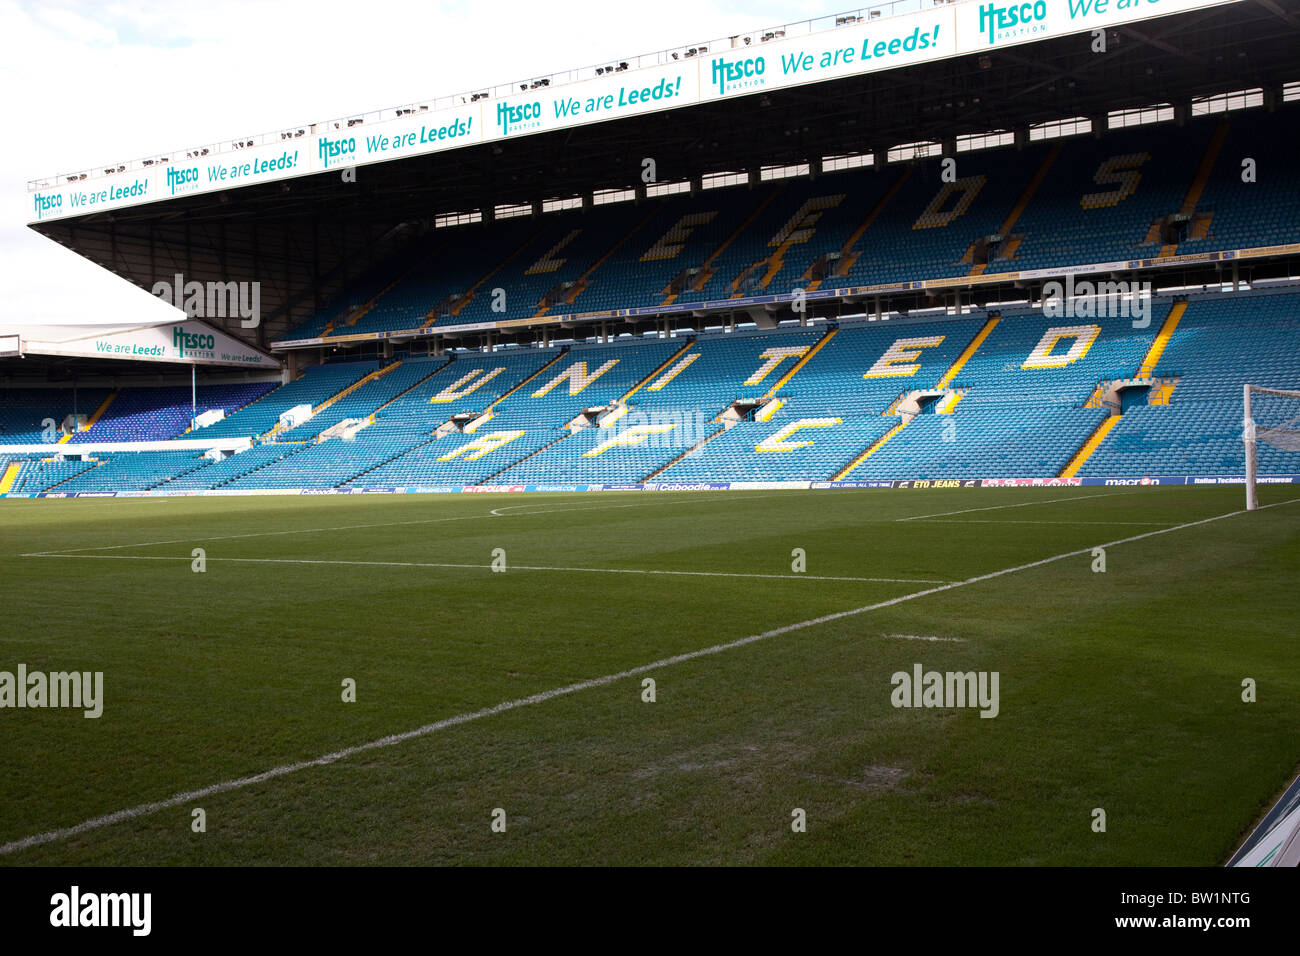 The East Stand at Leeds United's Football Ground Stock Photo